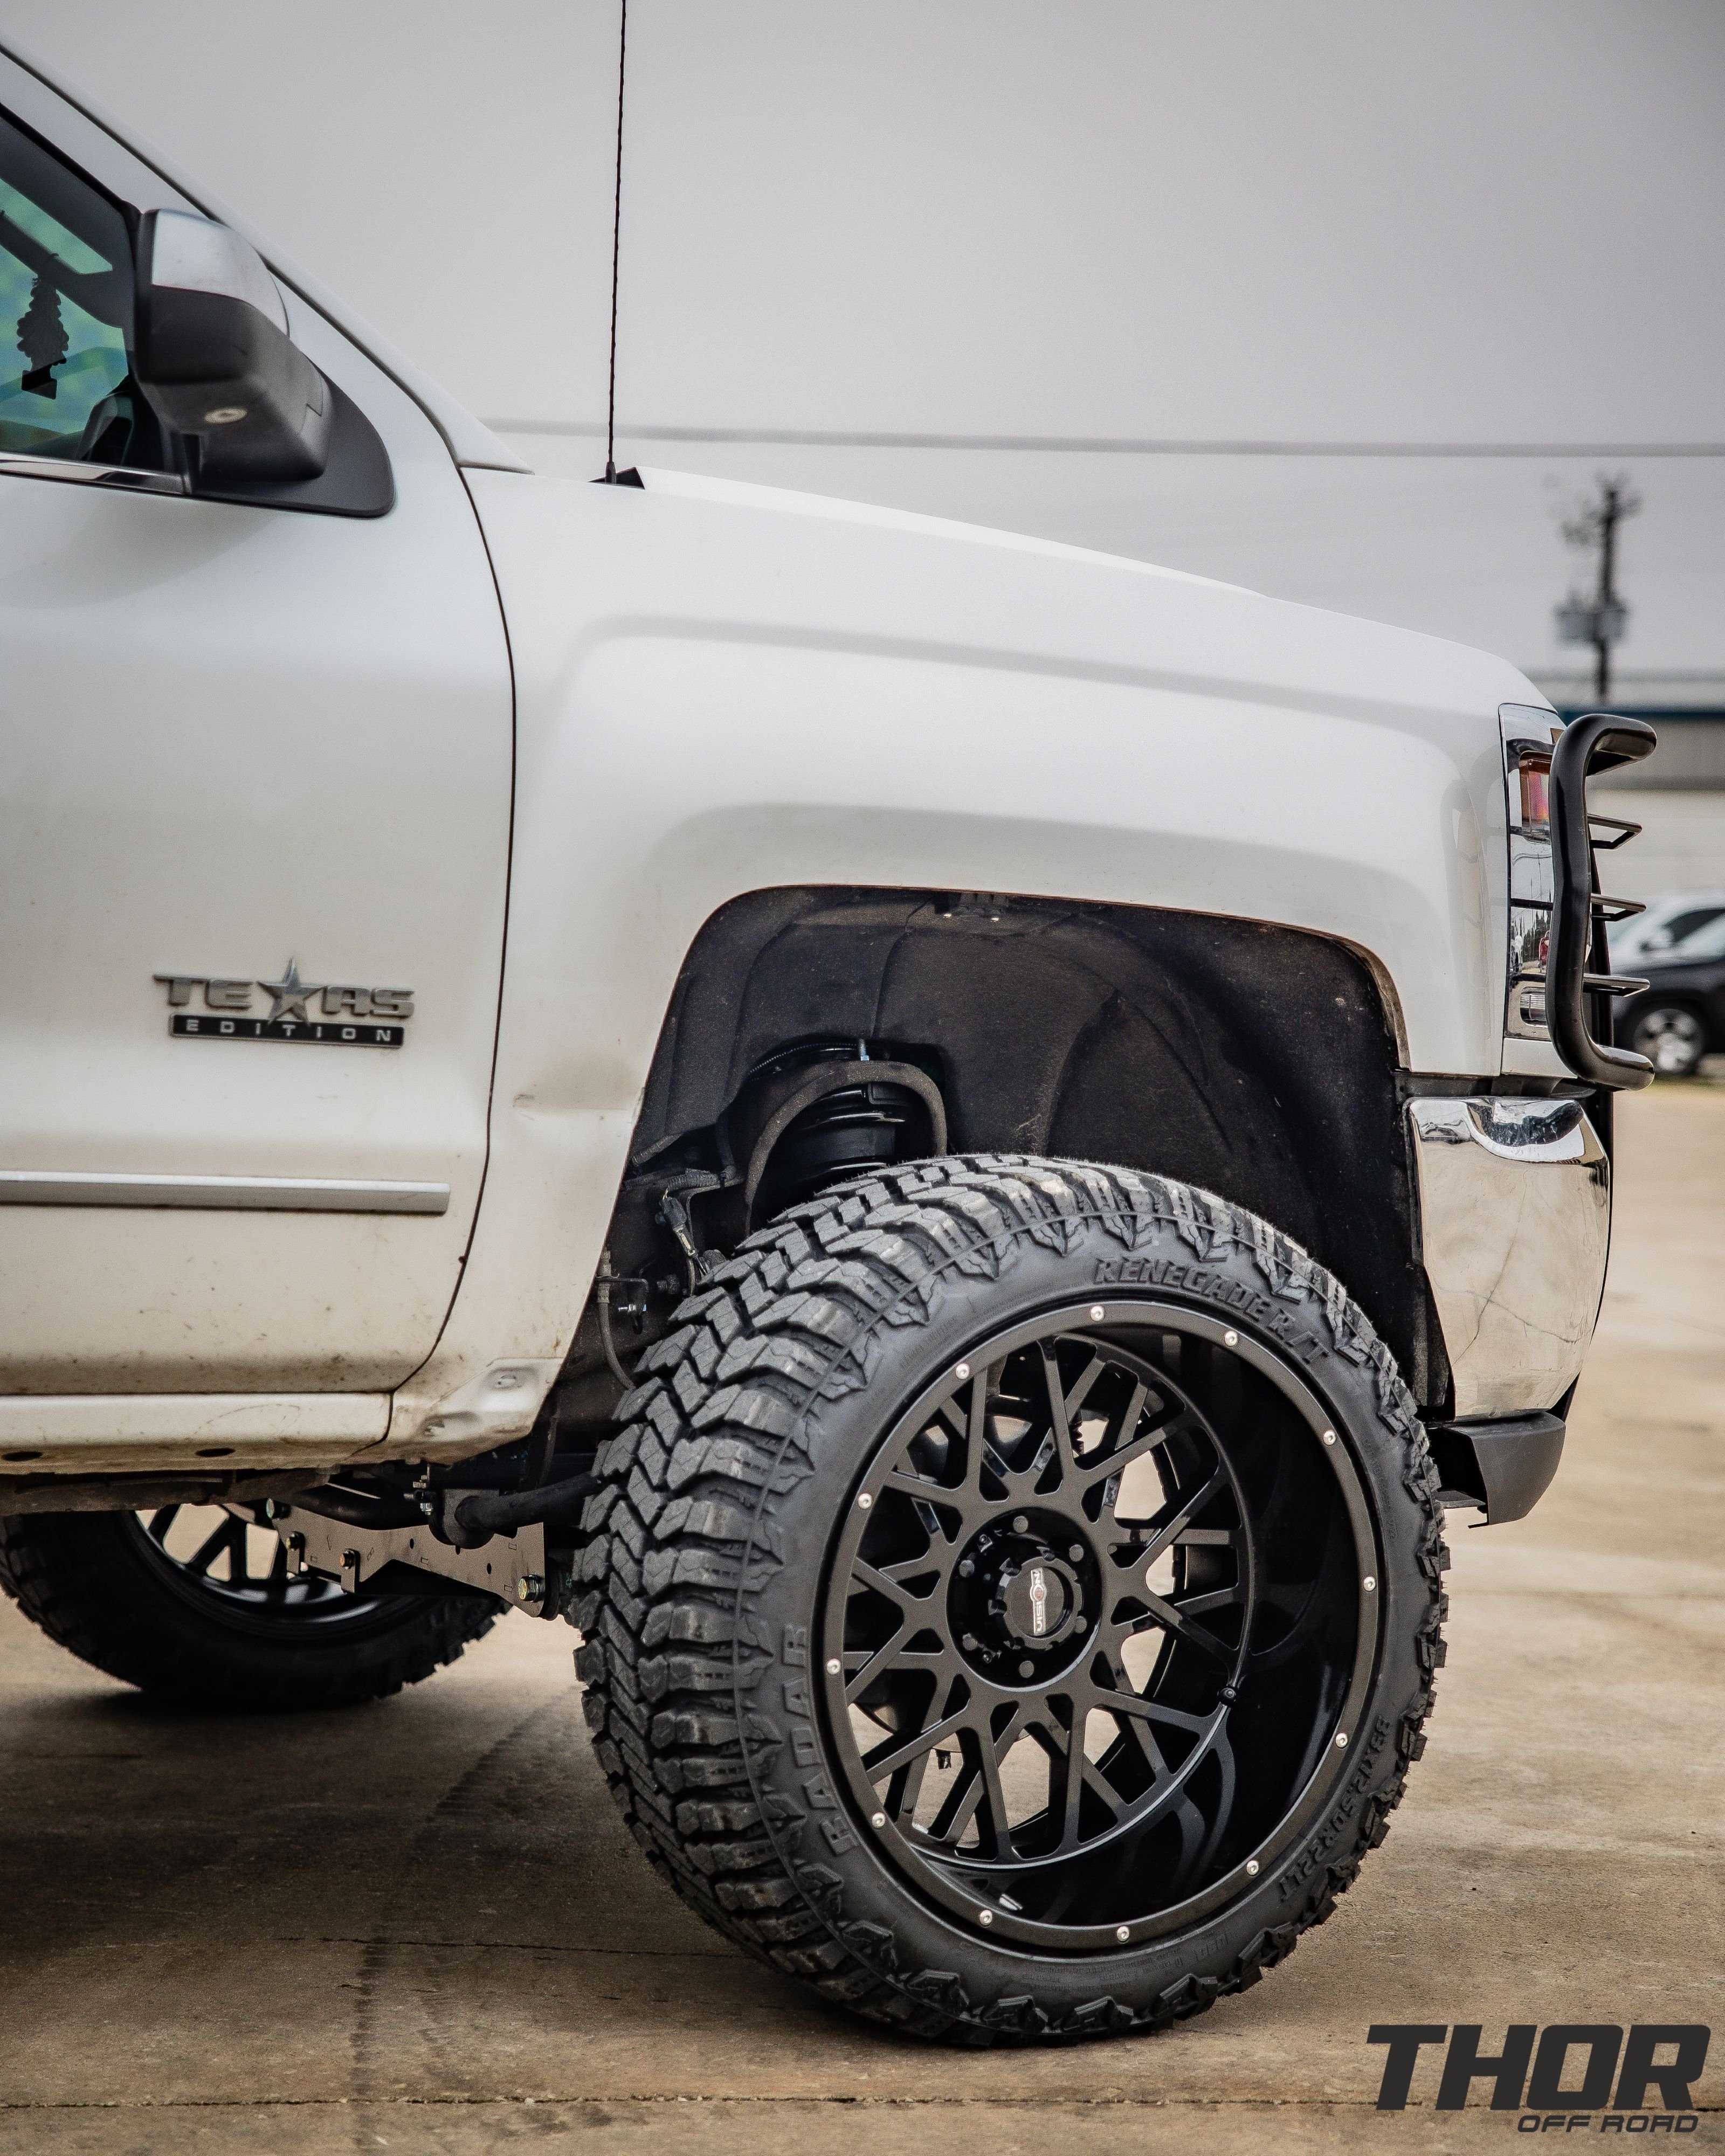 2018 Chevrolet Silverado 1500 in Silver with Rough Country 5" Lift Kit